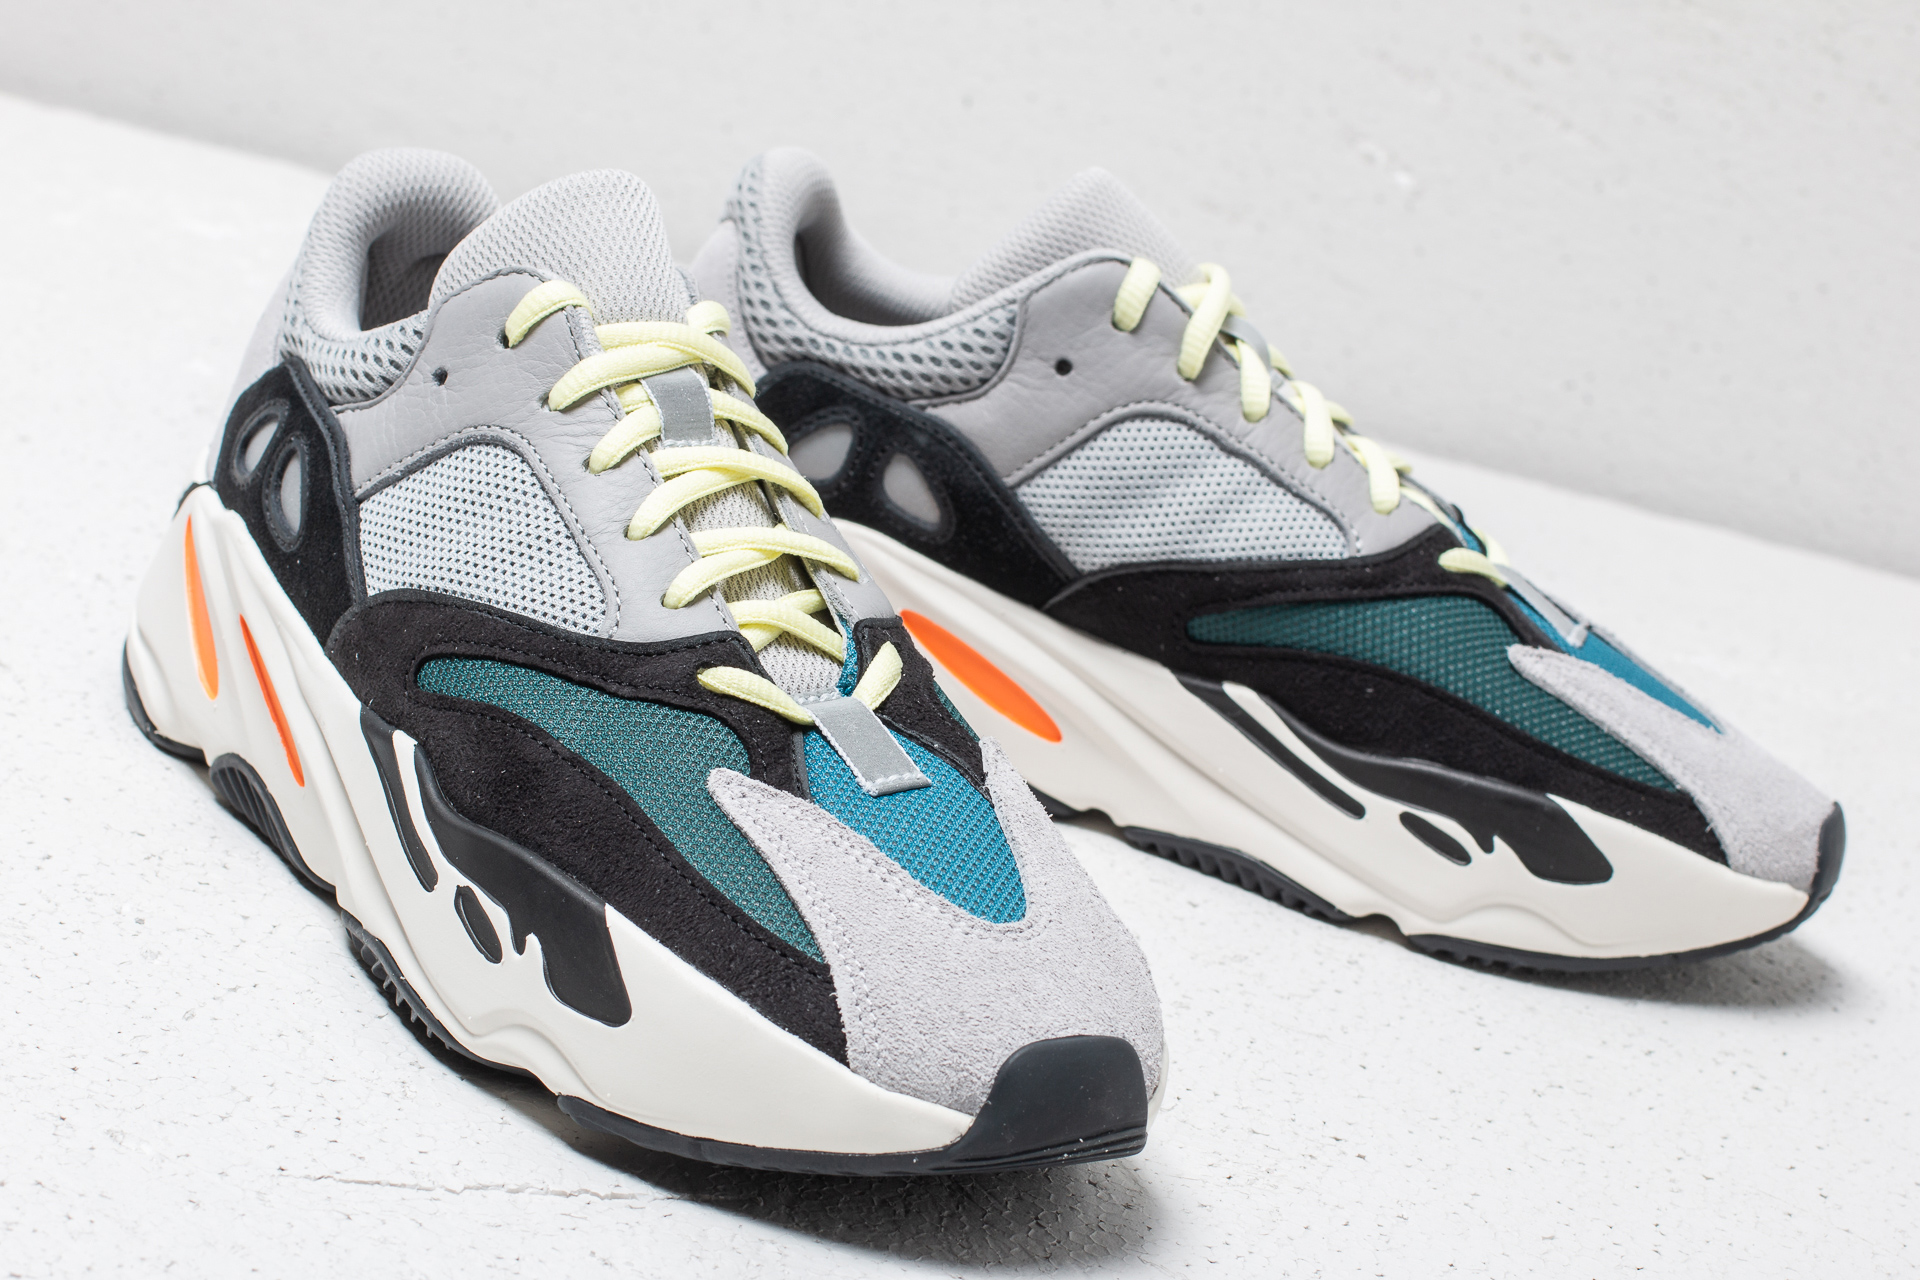 adidas YEEZY BOOST 700 - B75571 - Multi Solid Grey / Chalk White / Core - Footshop - Releases